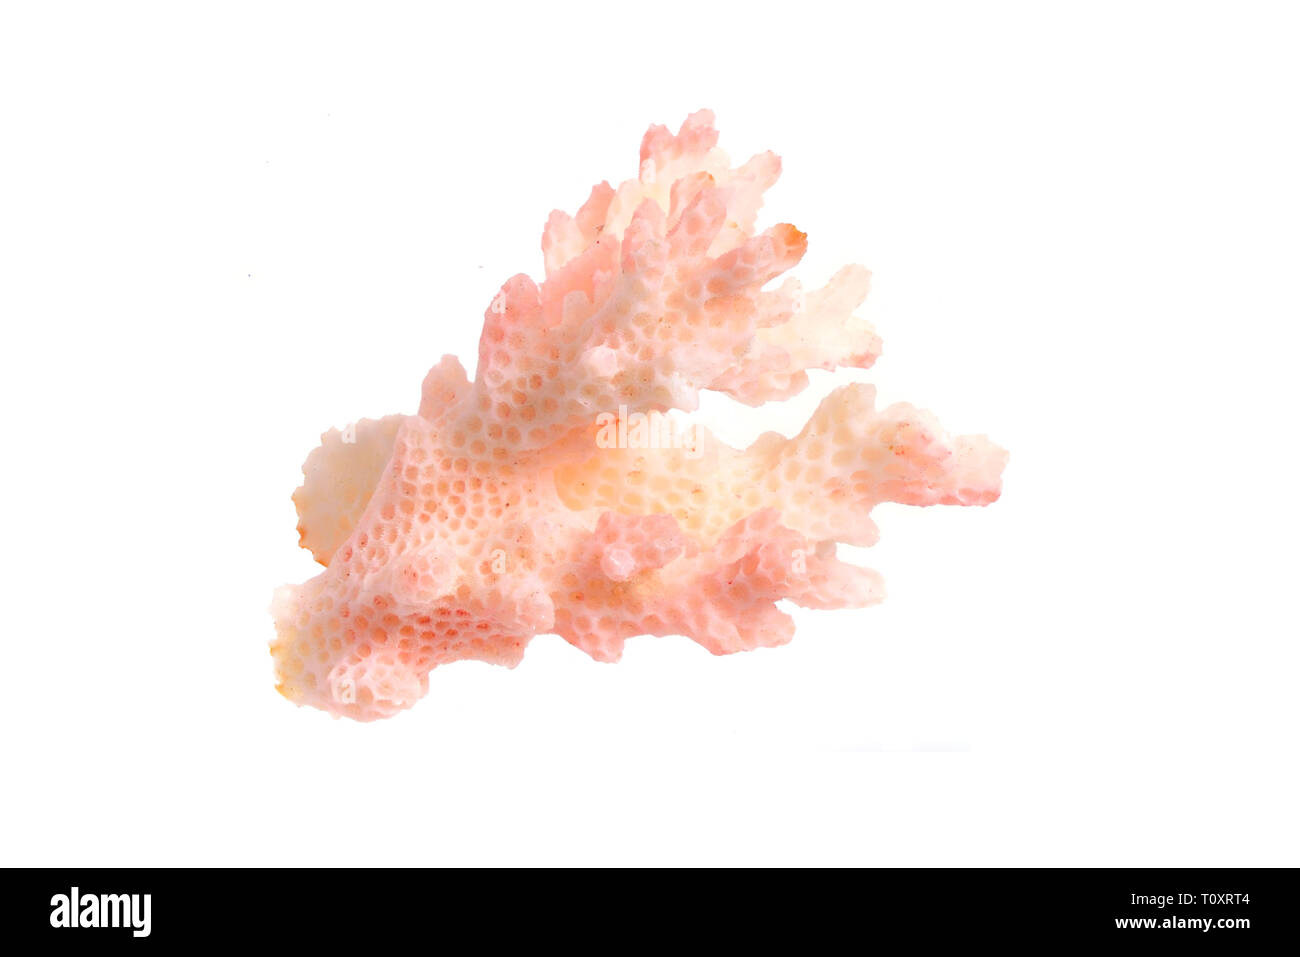 Piece of pink Coral isolated on white background. Full dept of field. Stock Photo